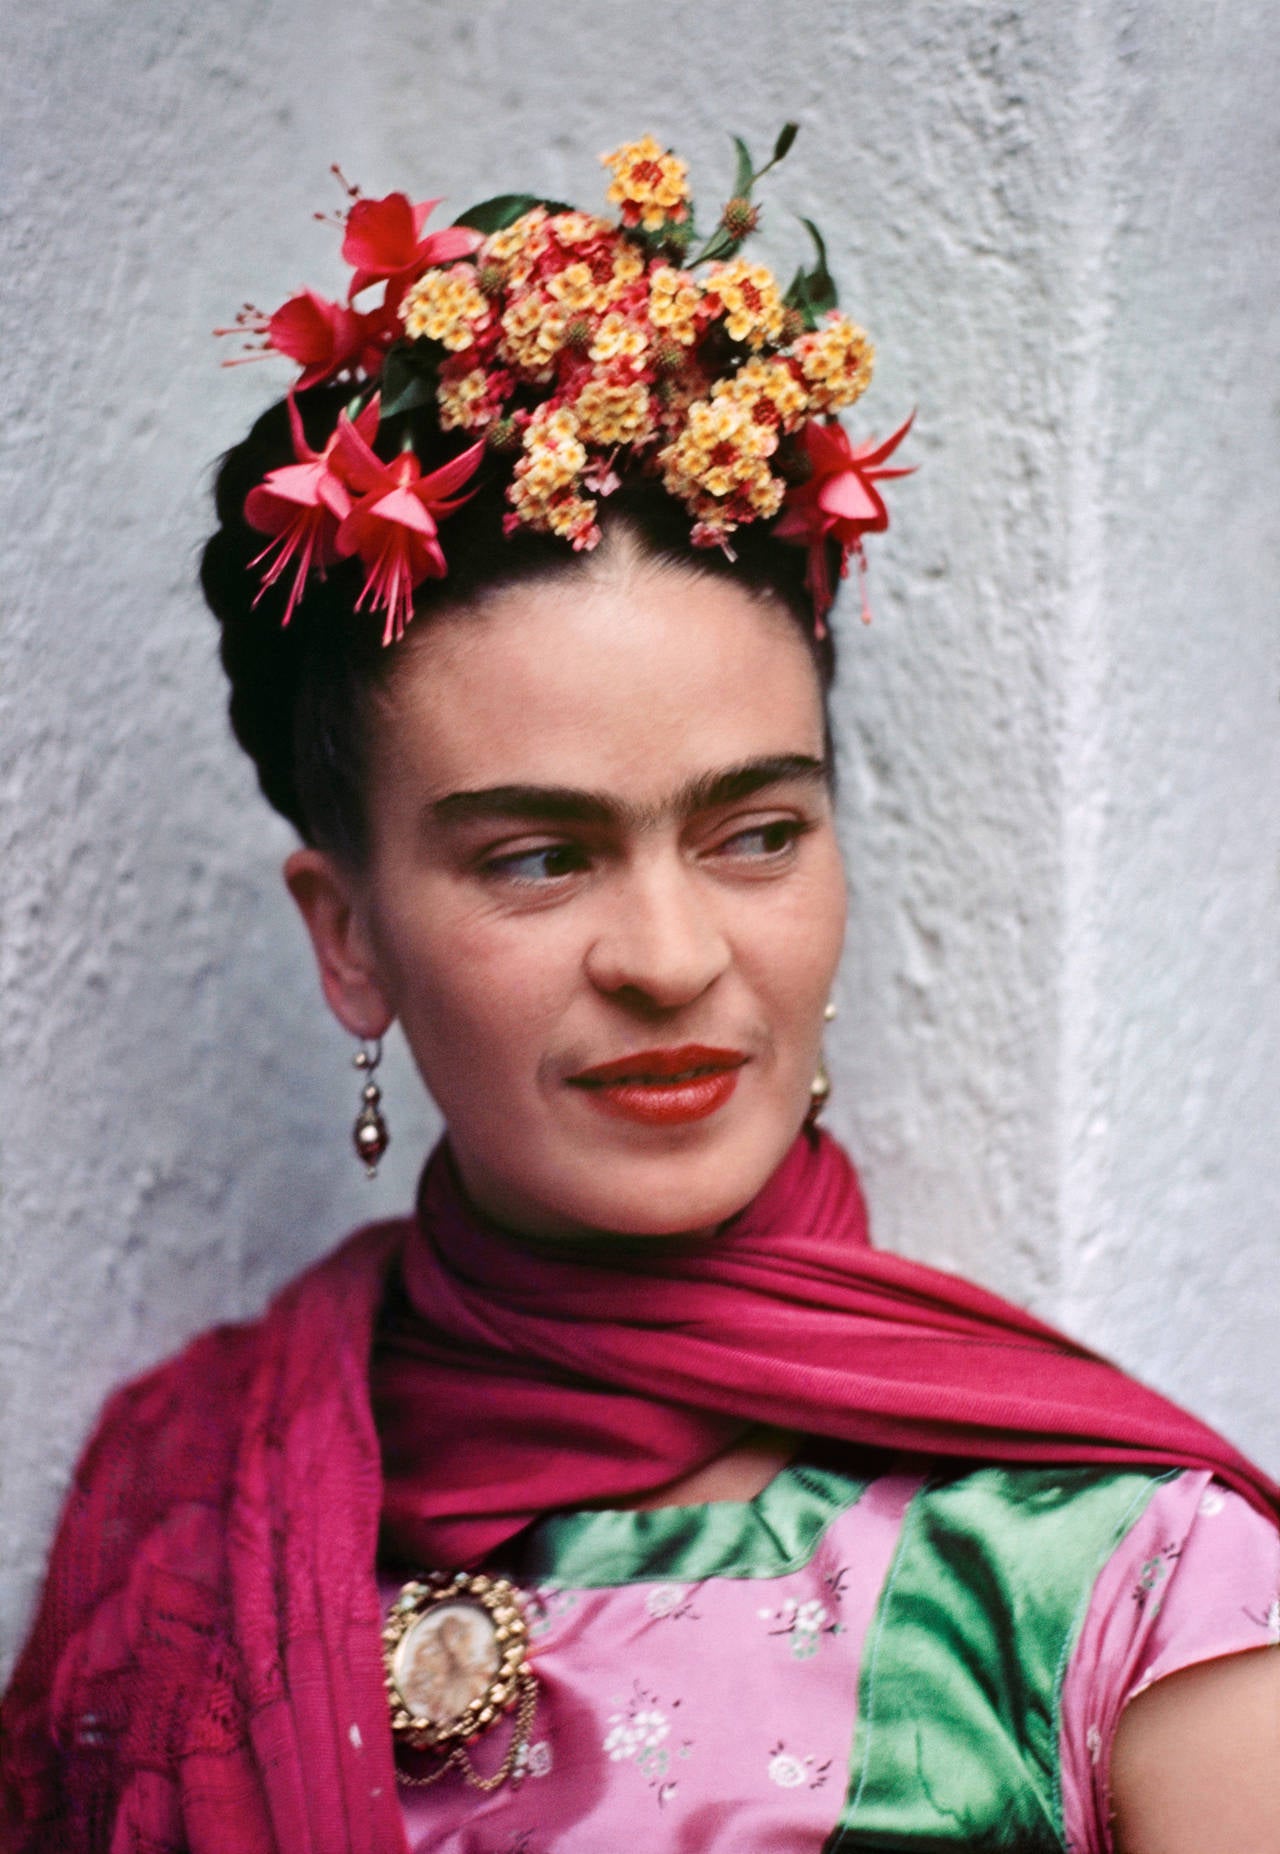 Frida in Pink and Green Blouse by Nickolas Muray is a colorful portrait of Mexican painter Frida Kahlo. Frida wears a green and pink shirt with a magenta scarf wrapped around her neck. She wears yellow and pink flowers in her hair, and glances off